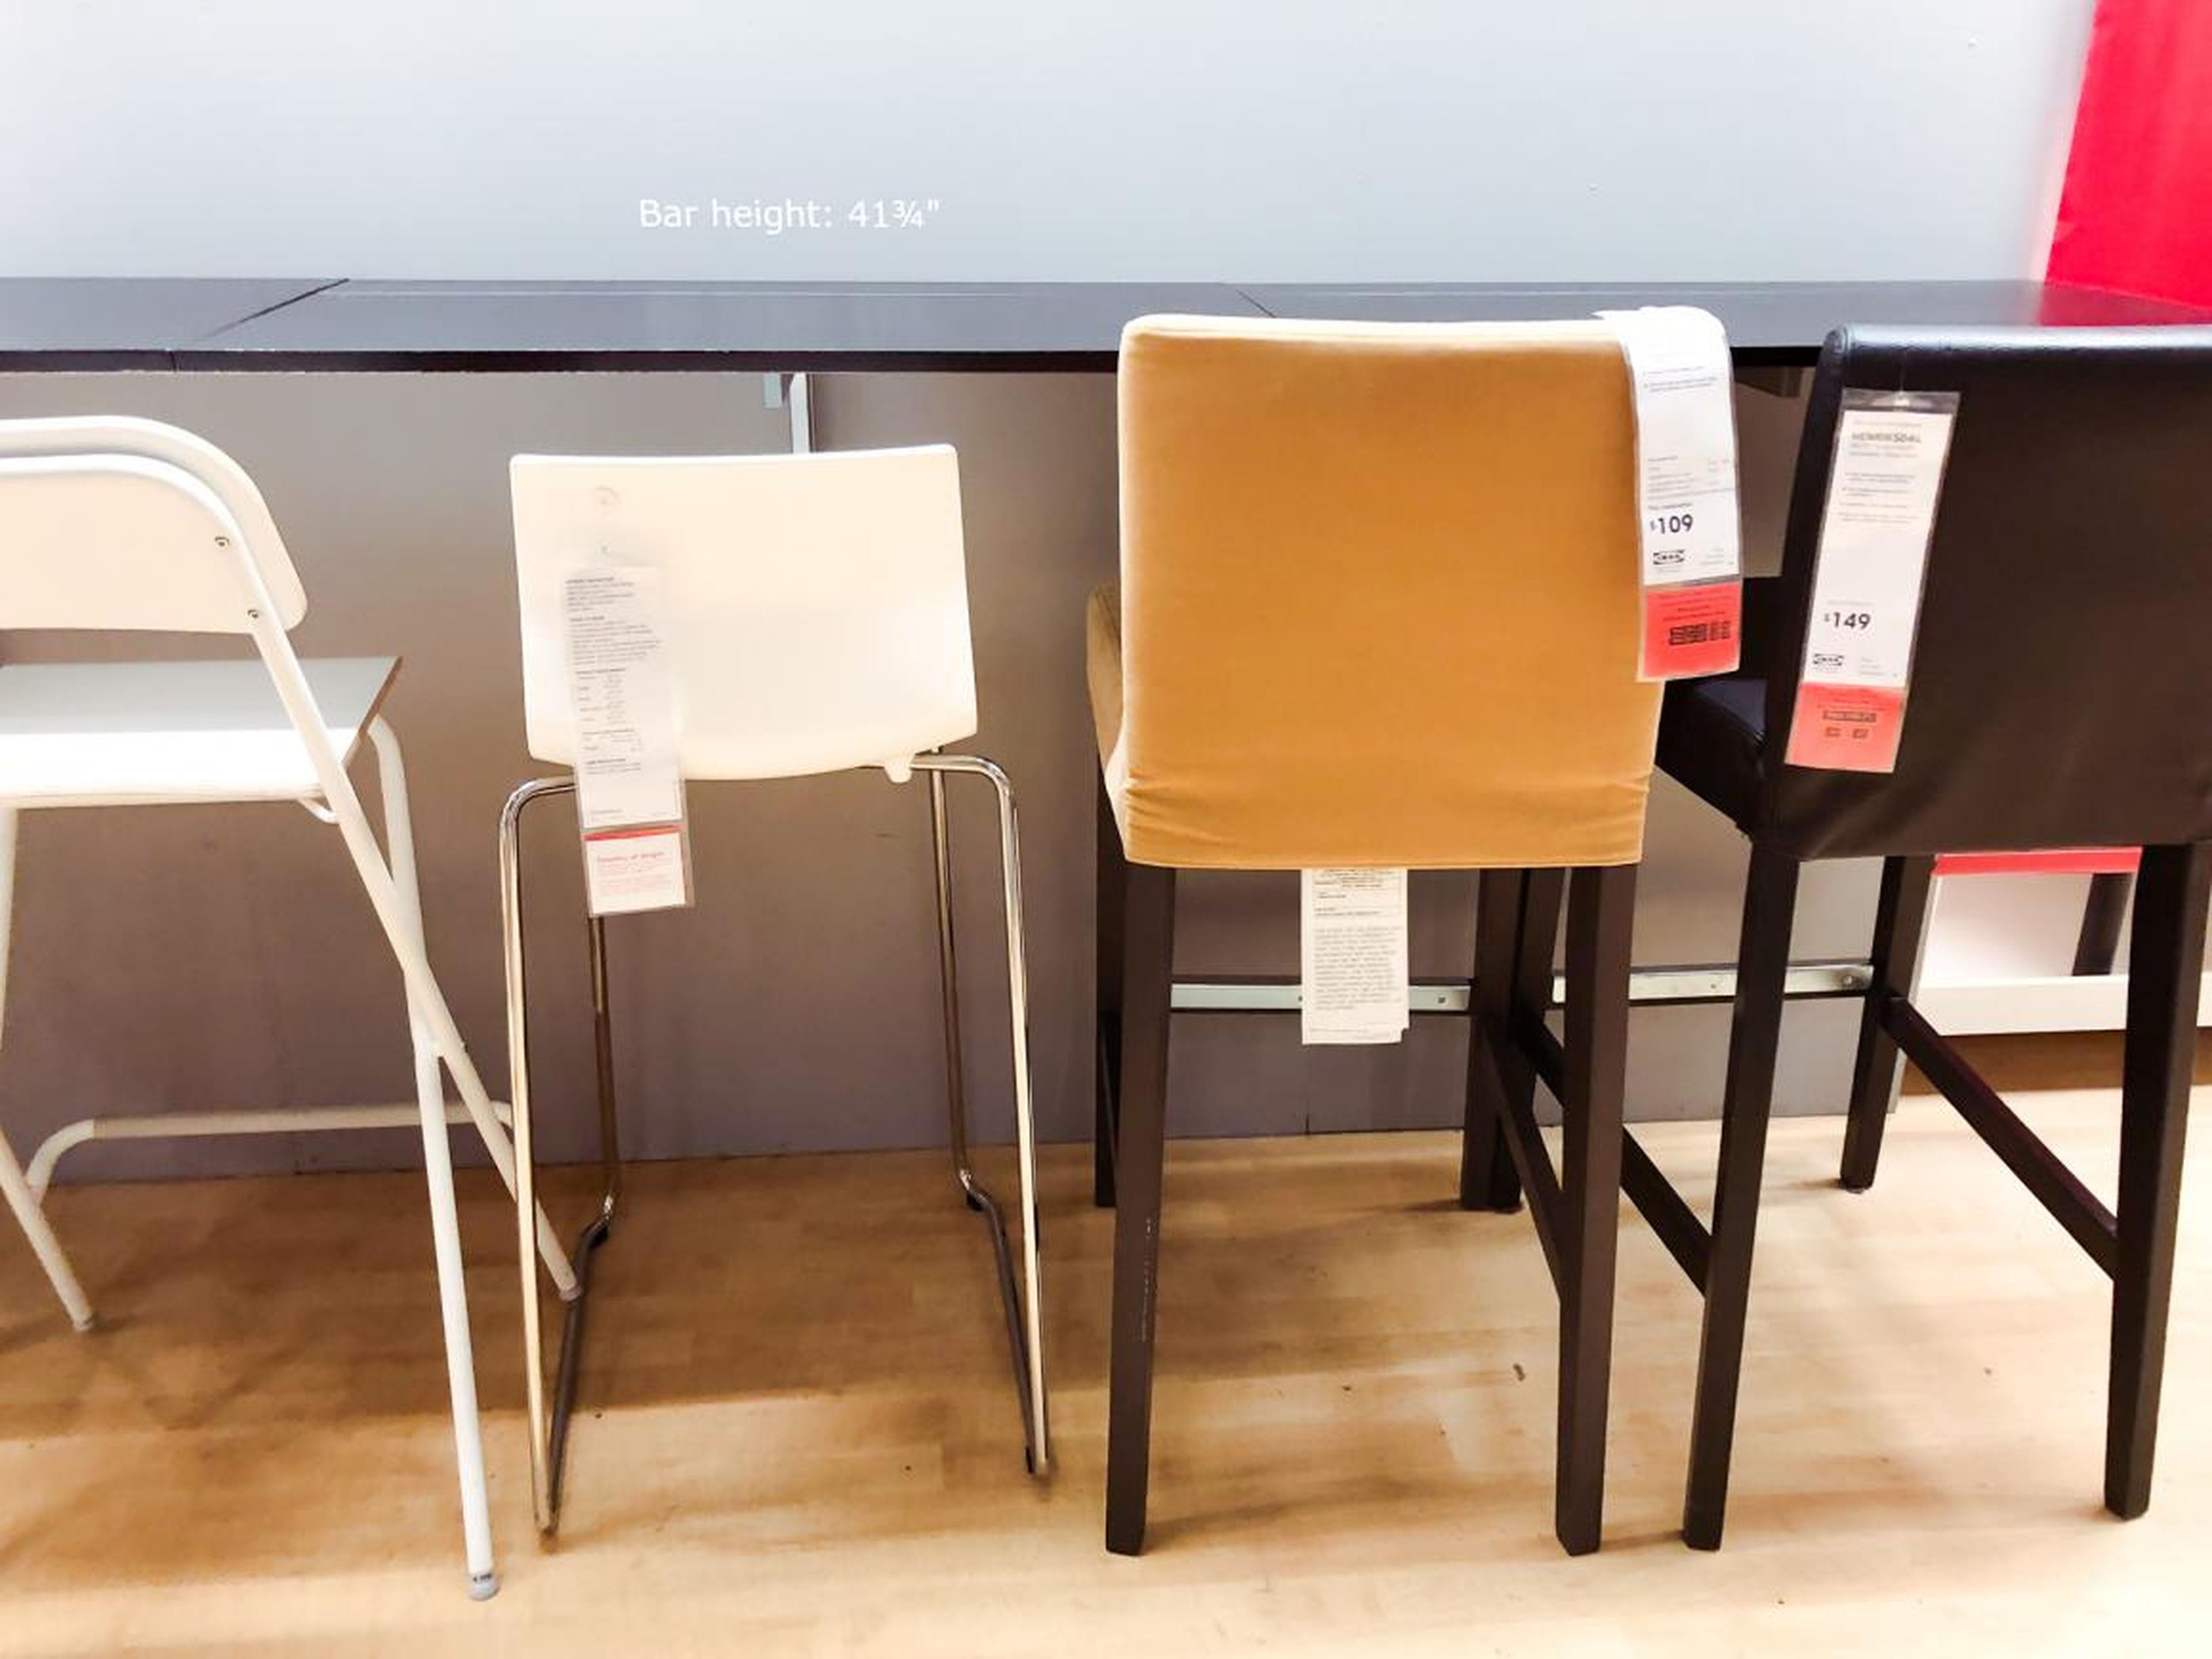 It also sells bar stools that range in price from $60 to $150. The quality varied — some of the less expensive products didn't feel super sturdy.